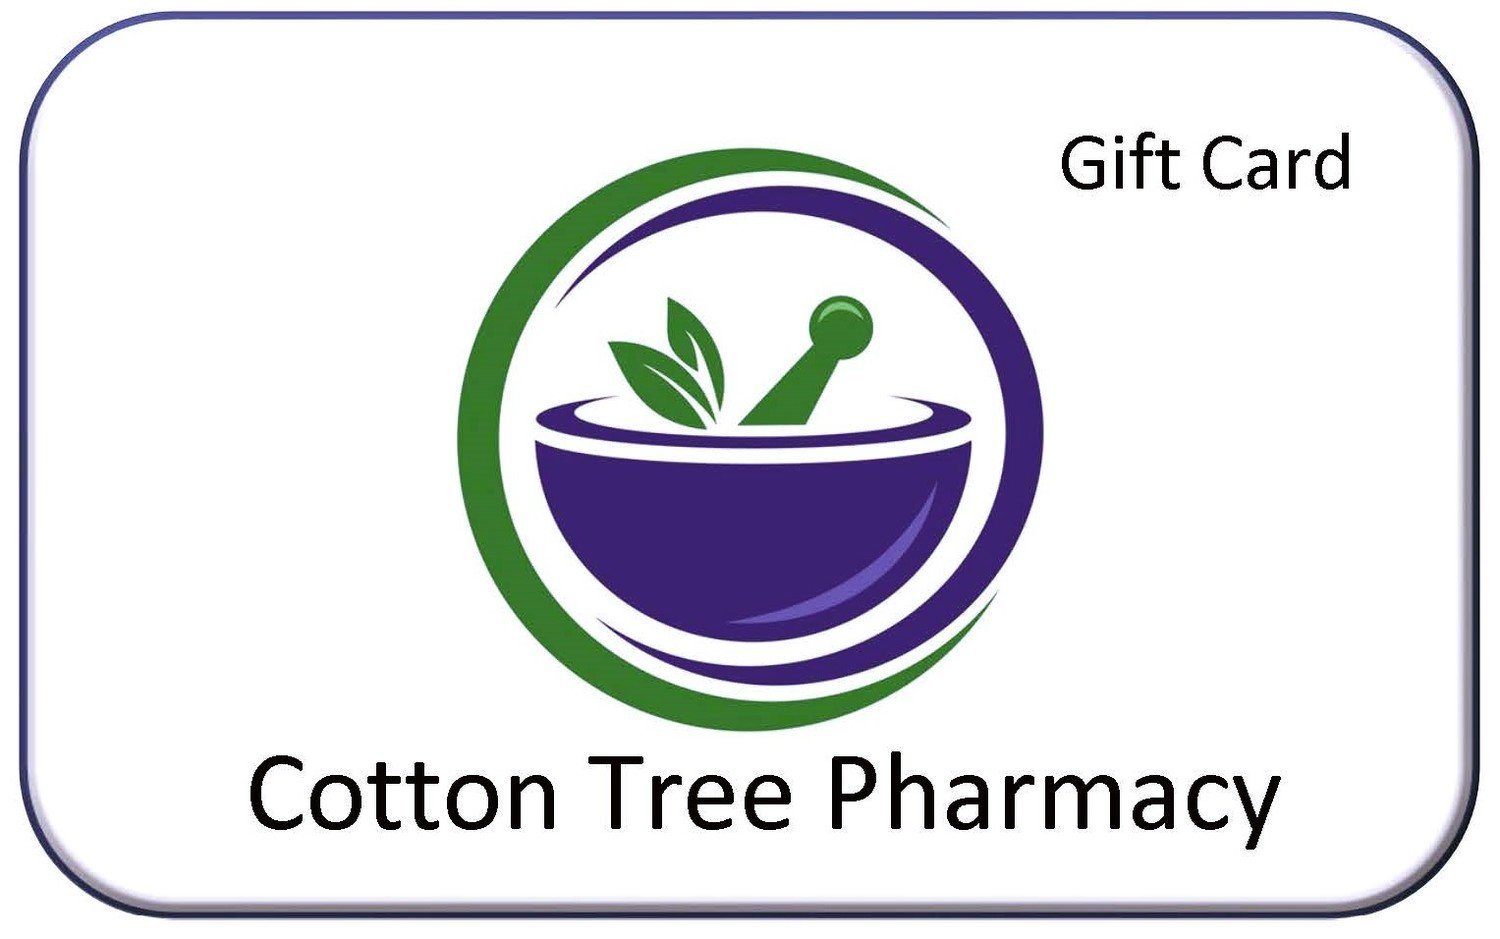 Cotton Tree Gift Card